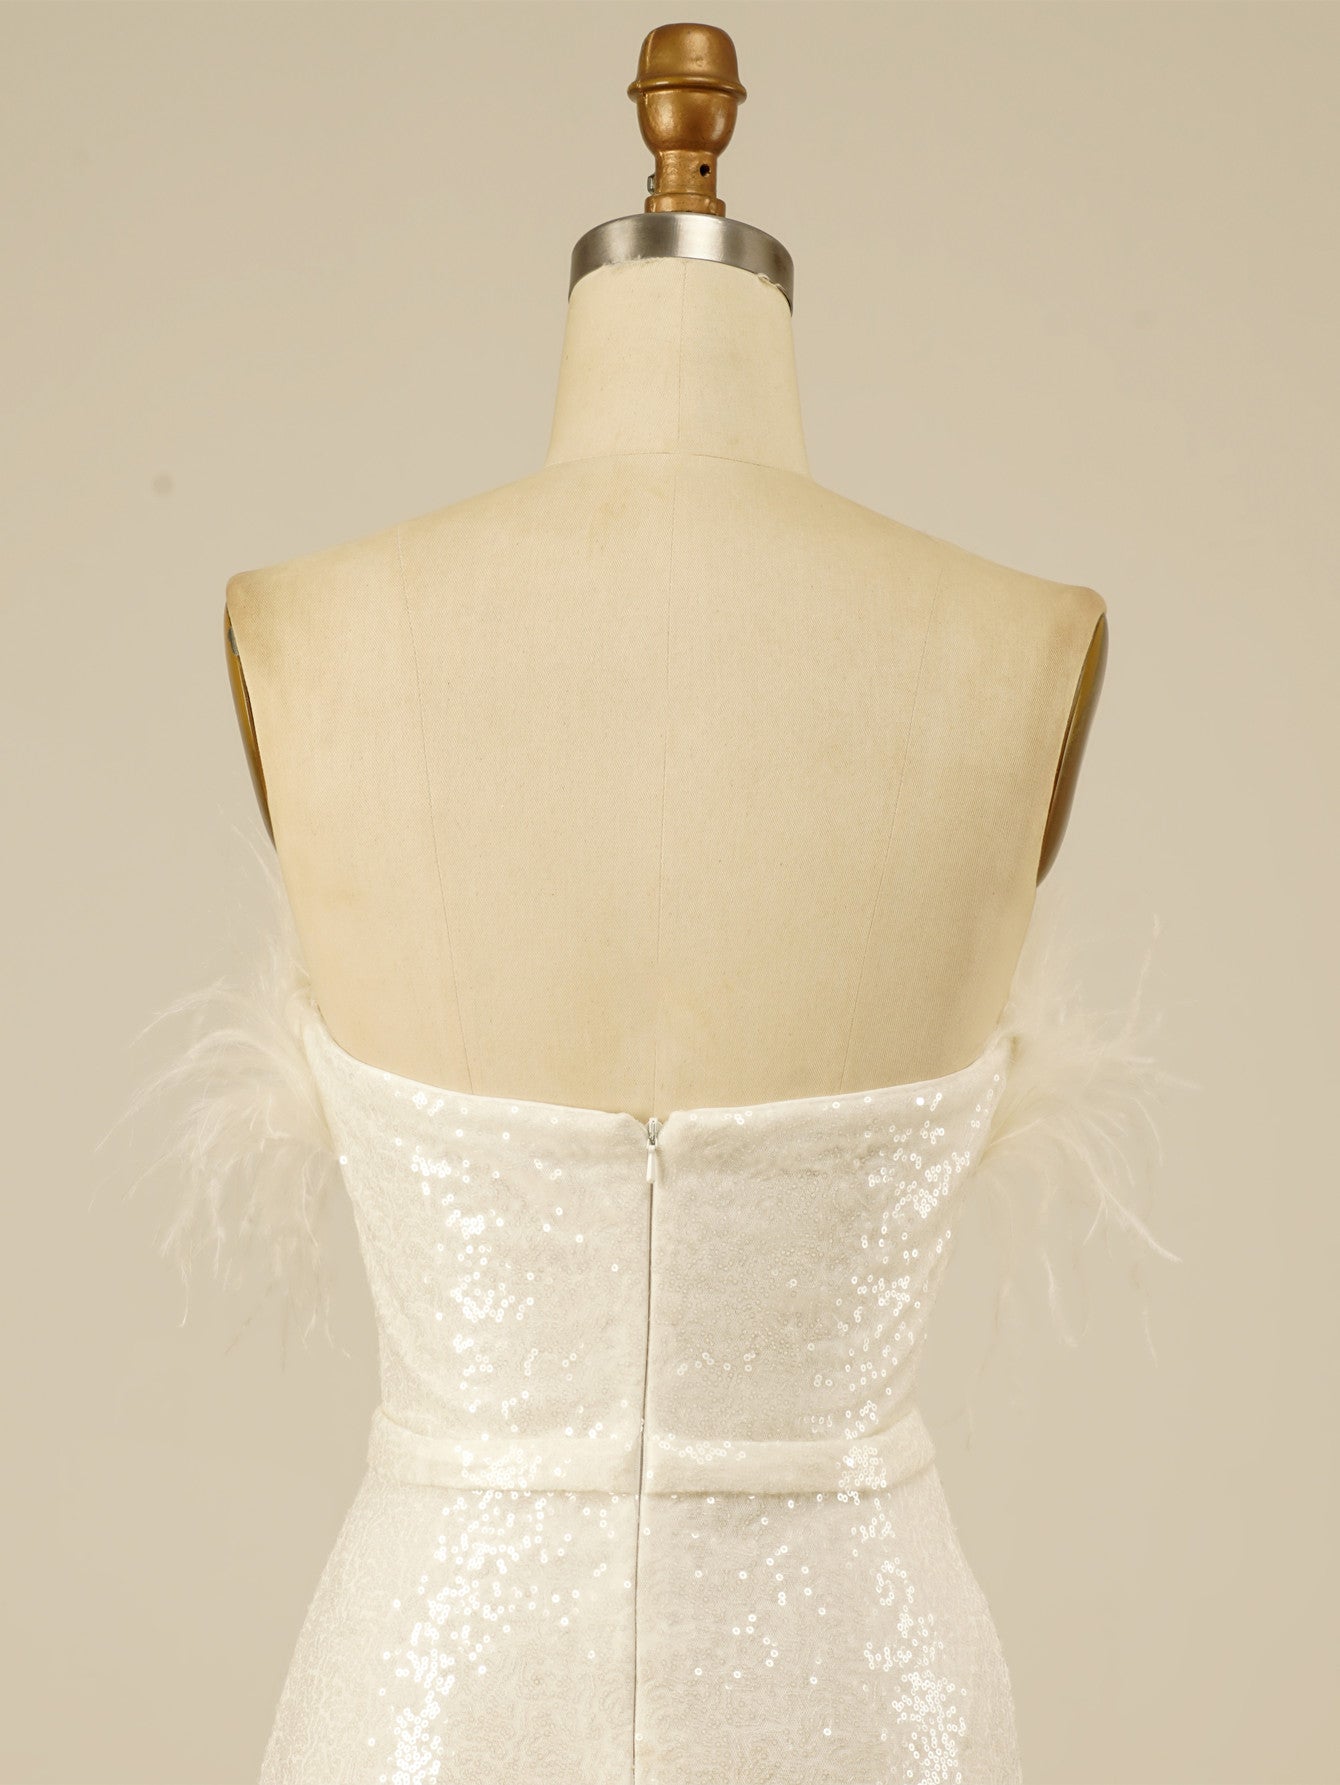 Sparkly Strapless White Homecoming Short Dress With Feathers